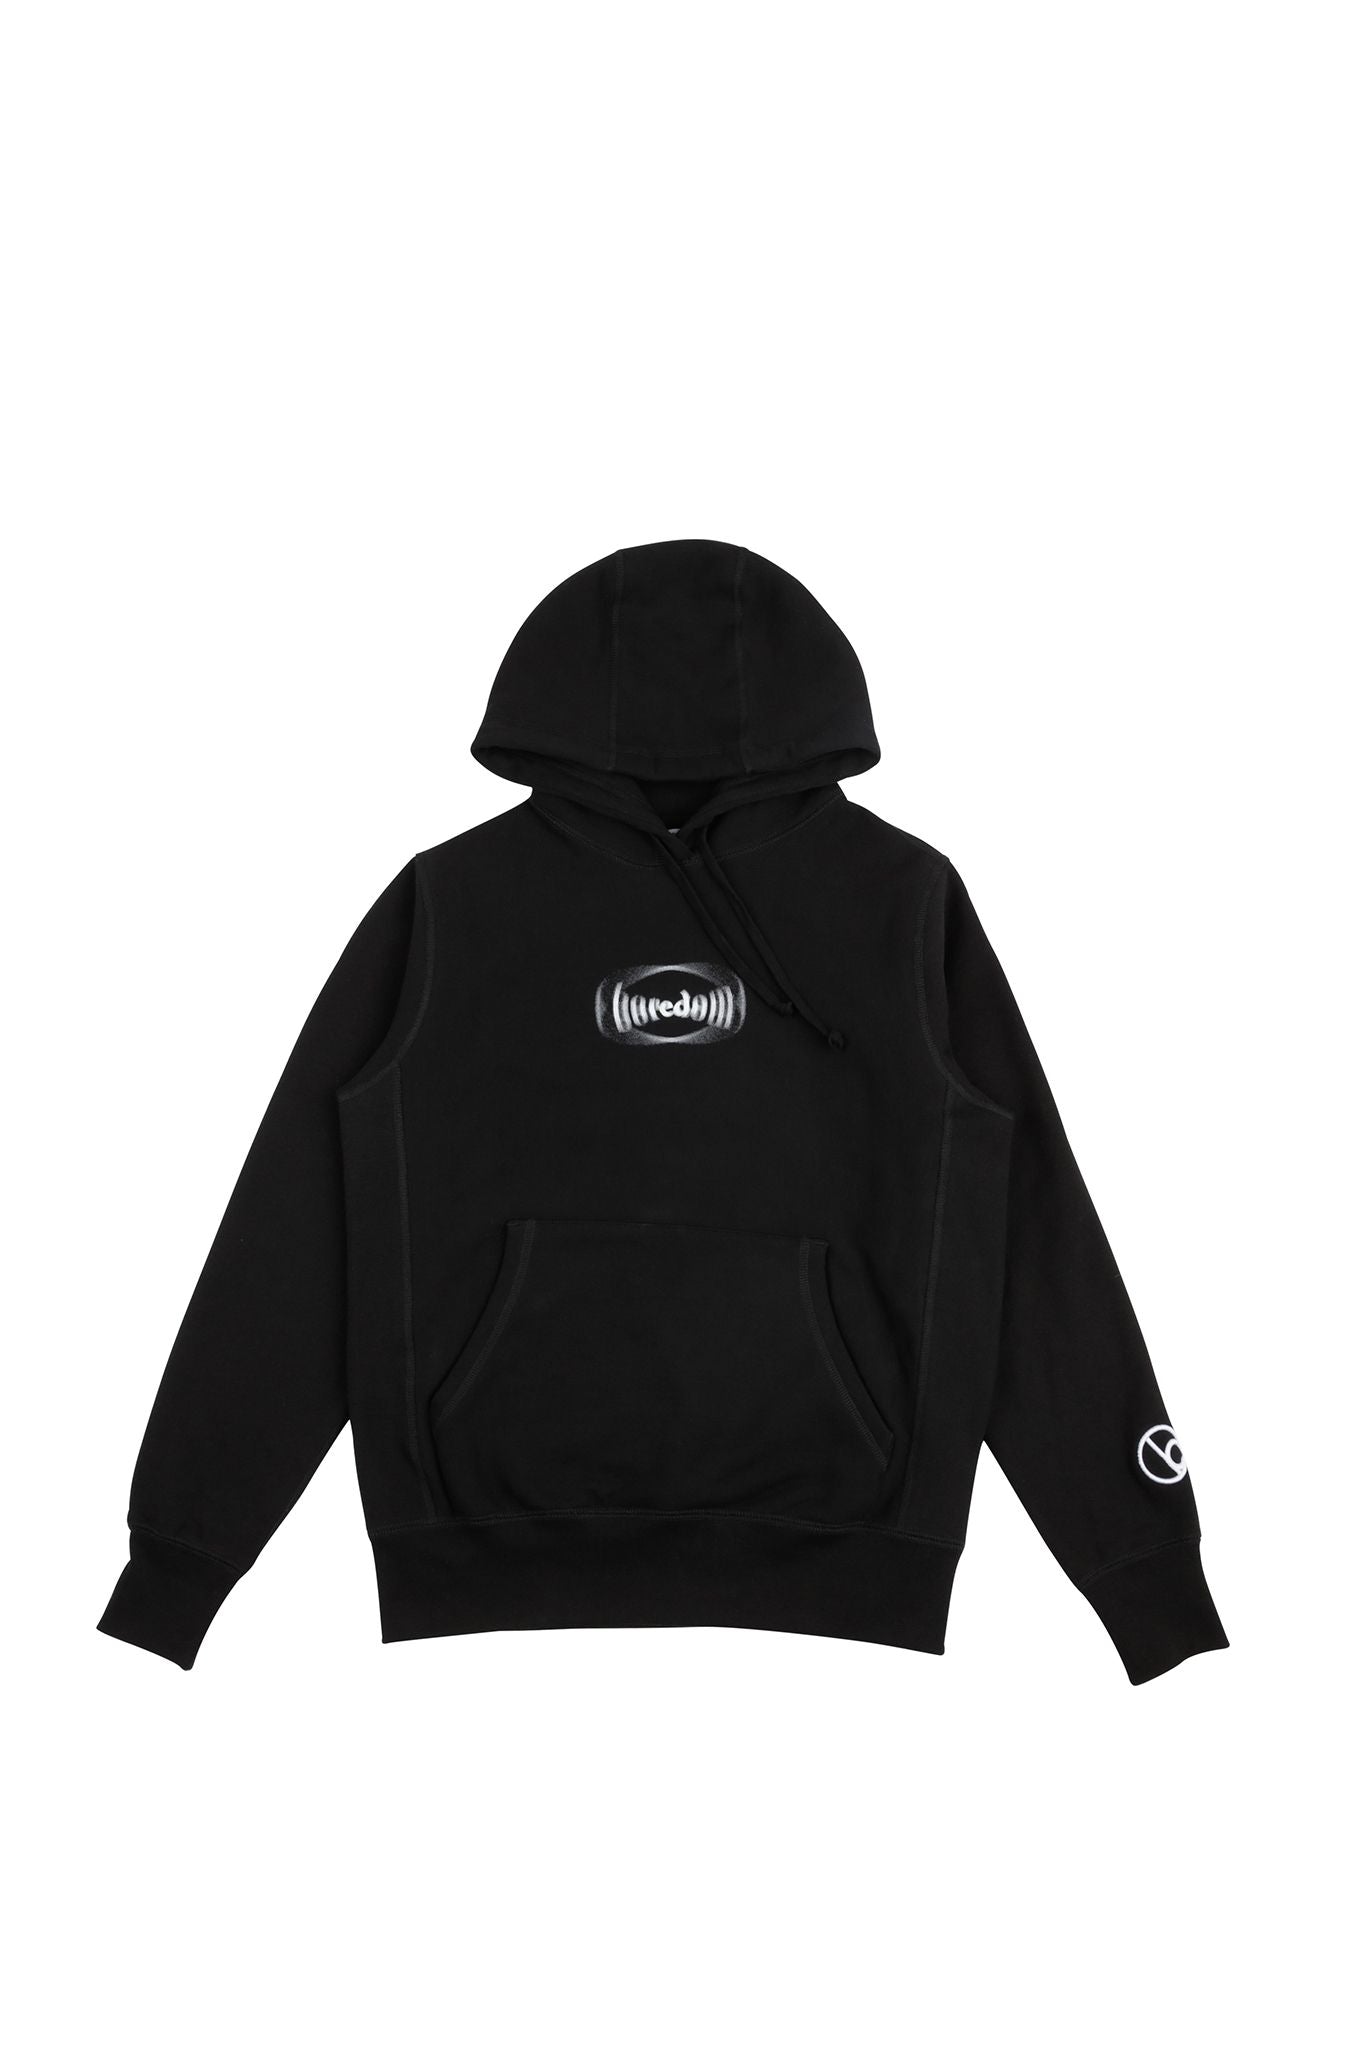 Frequency Hoodie BLACK

screen print to front
puff embroidery to left sleeve 
made in Canada
400gsm cotton fleece
100% Cotton 
 BOREDOM